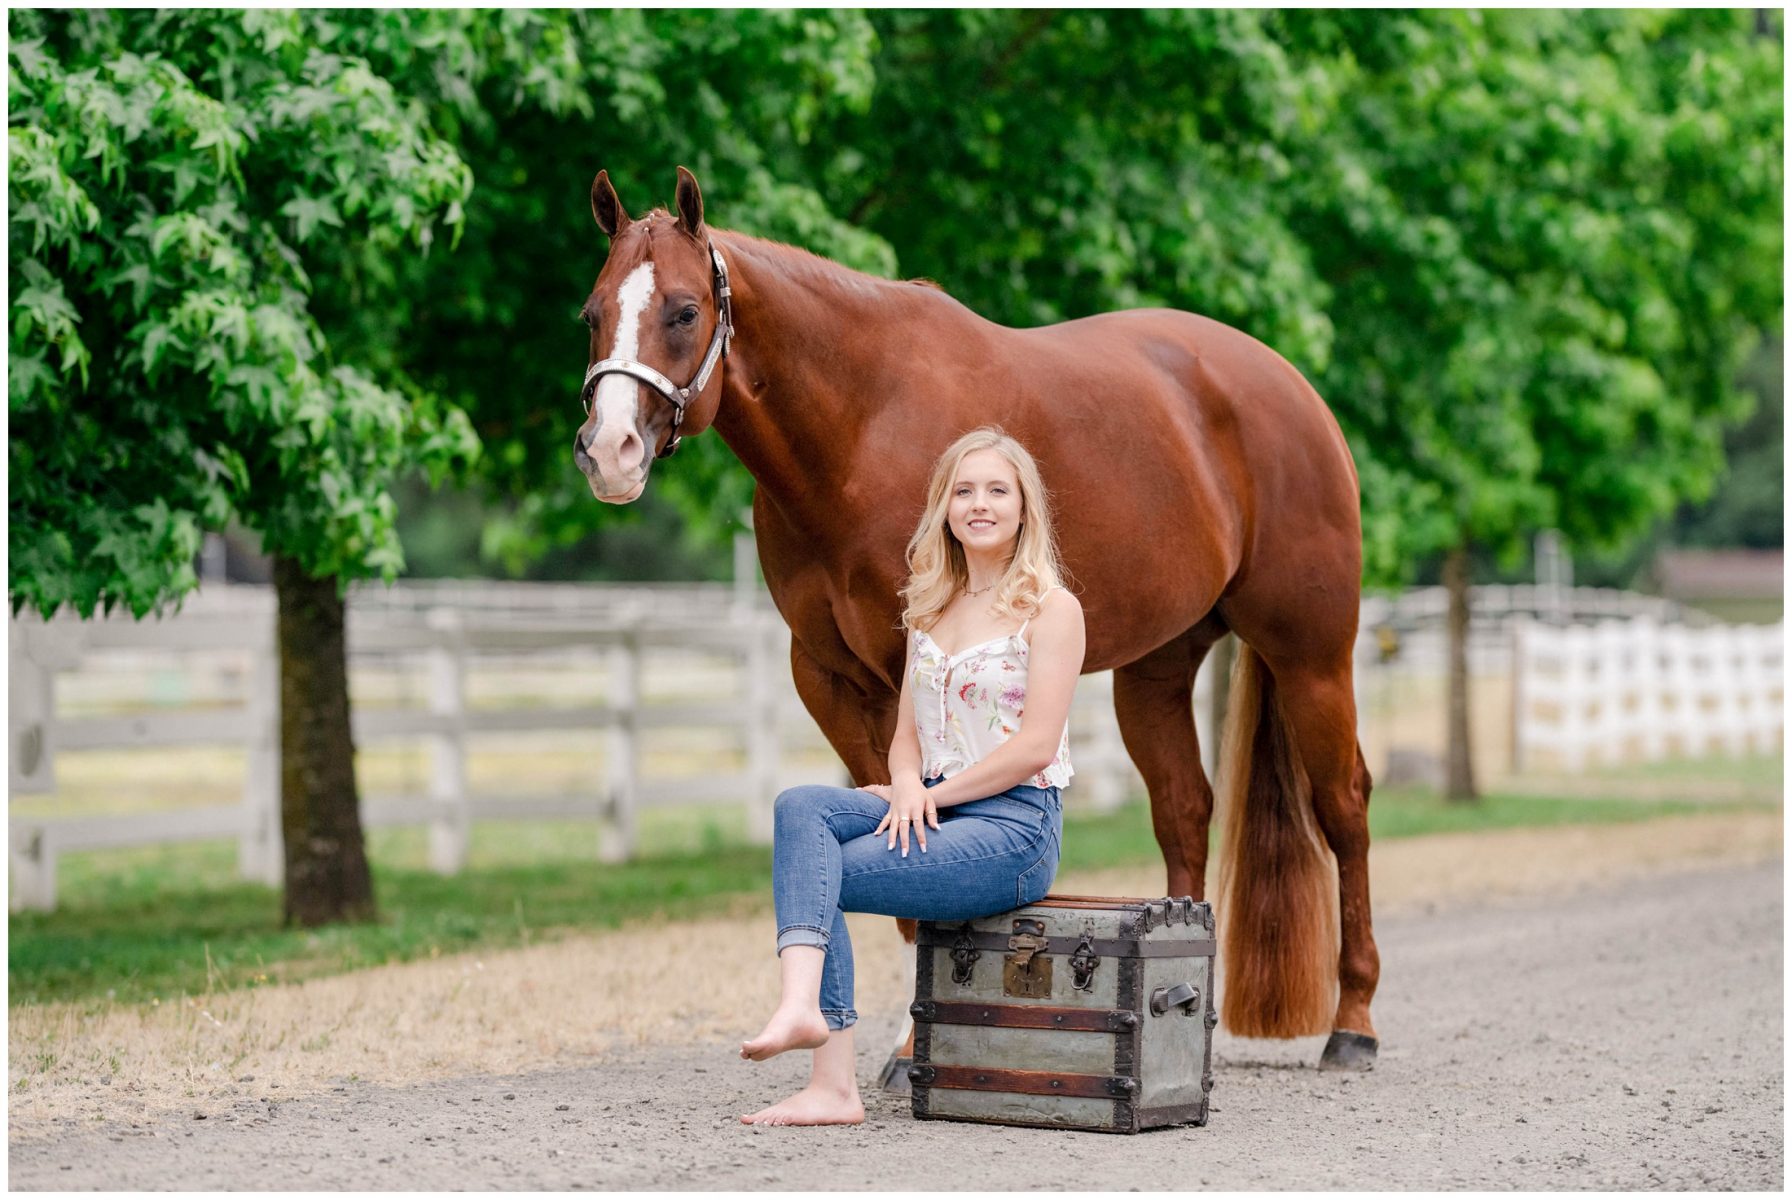 http://kirstiemarie.com/wp-content/uploads/2019/09/Jacqueline-Potwora-AQHYA-champion-The-Absolute-Best-McCulloch-Training-Stable-Equestrian-Kirstie-Marie-Photography_0006-1.jpg